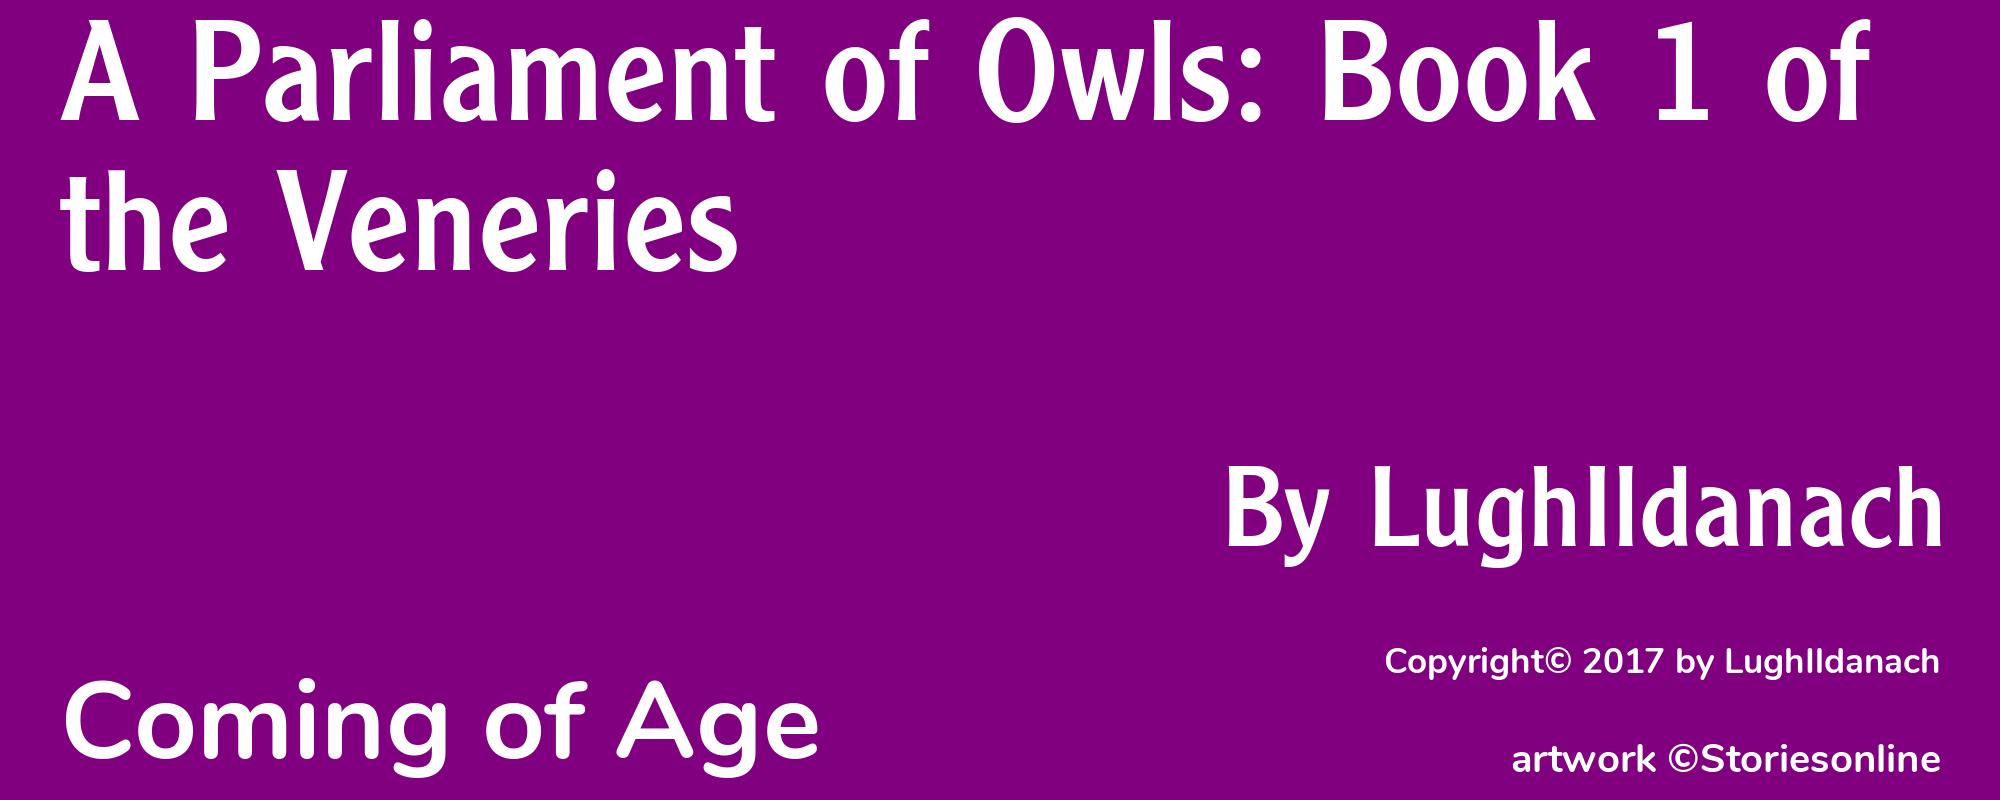 A Parliament of Owls: Book 1 of the Veneries - Cover